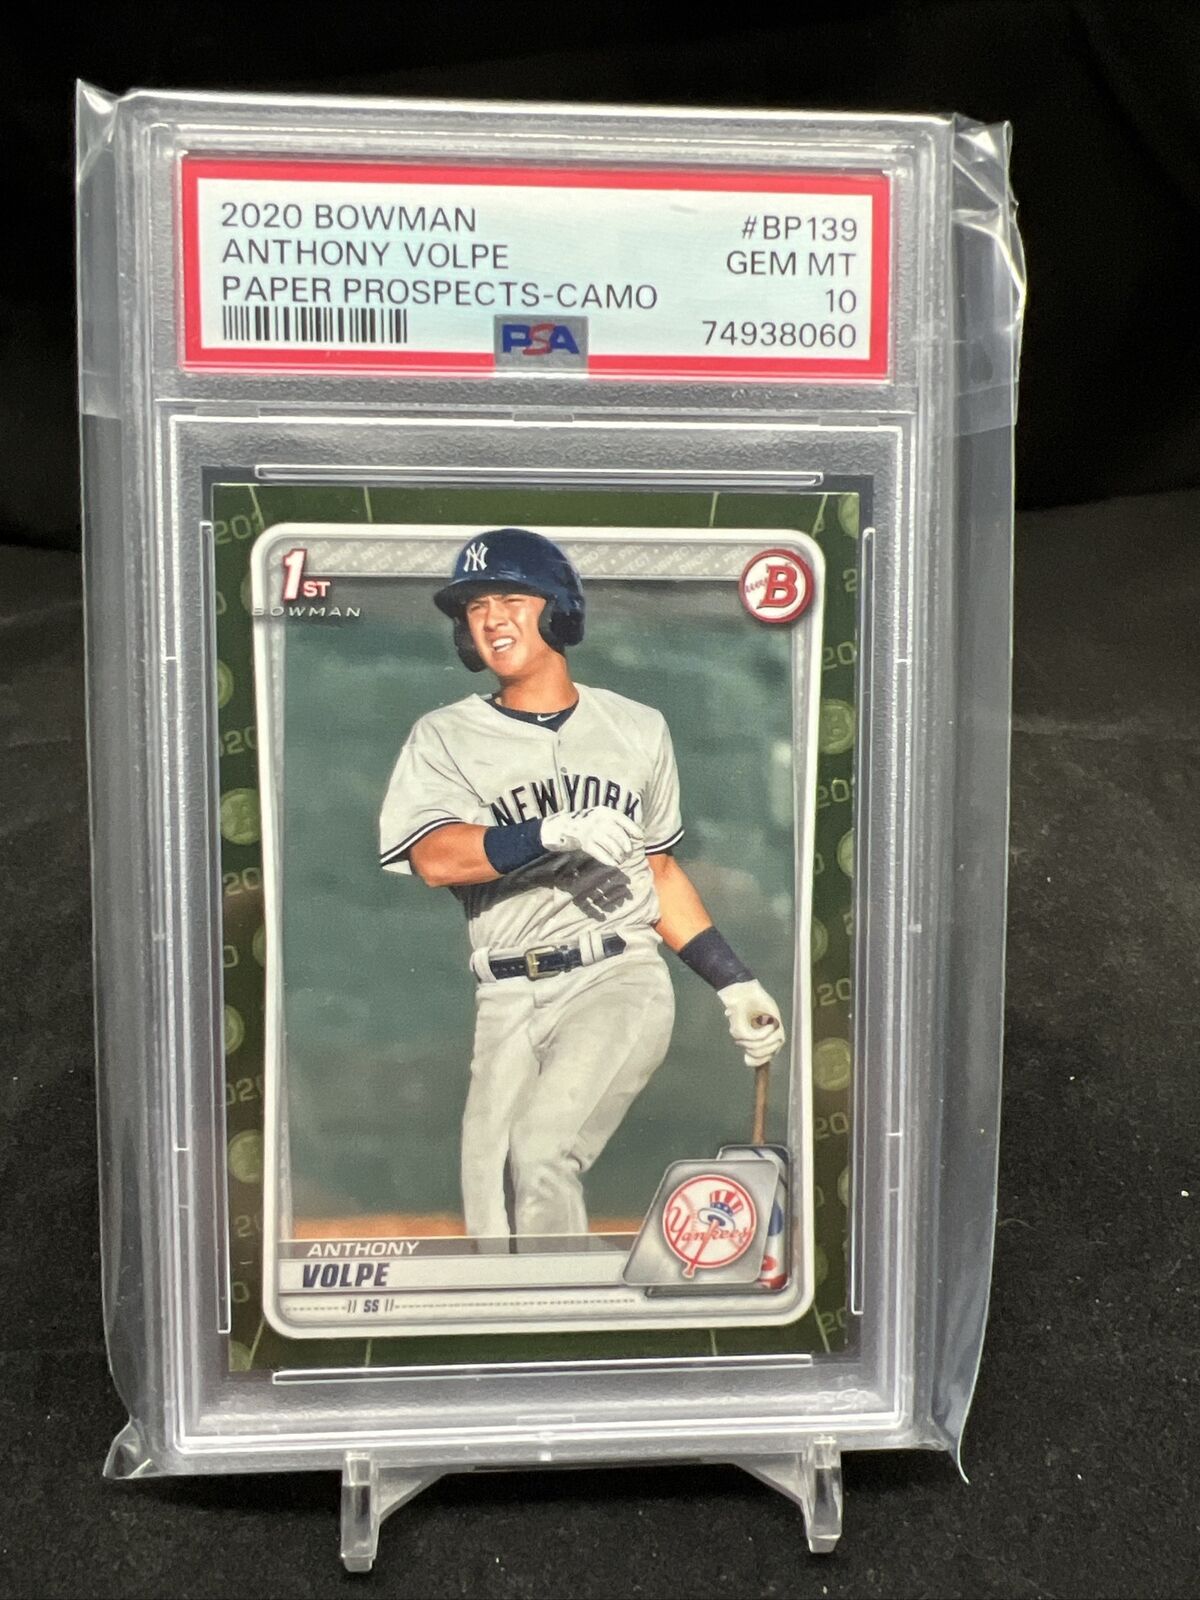 2020 Bowman 1st Anthony Volpe Paper Prospects Camo #BP-139 PSA 10 NY Yankees